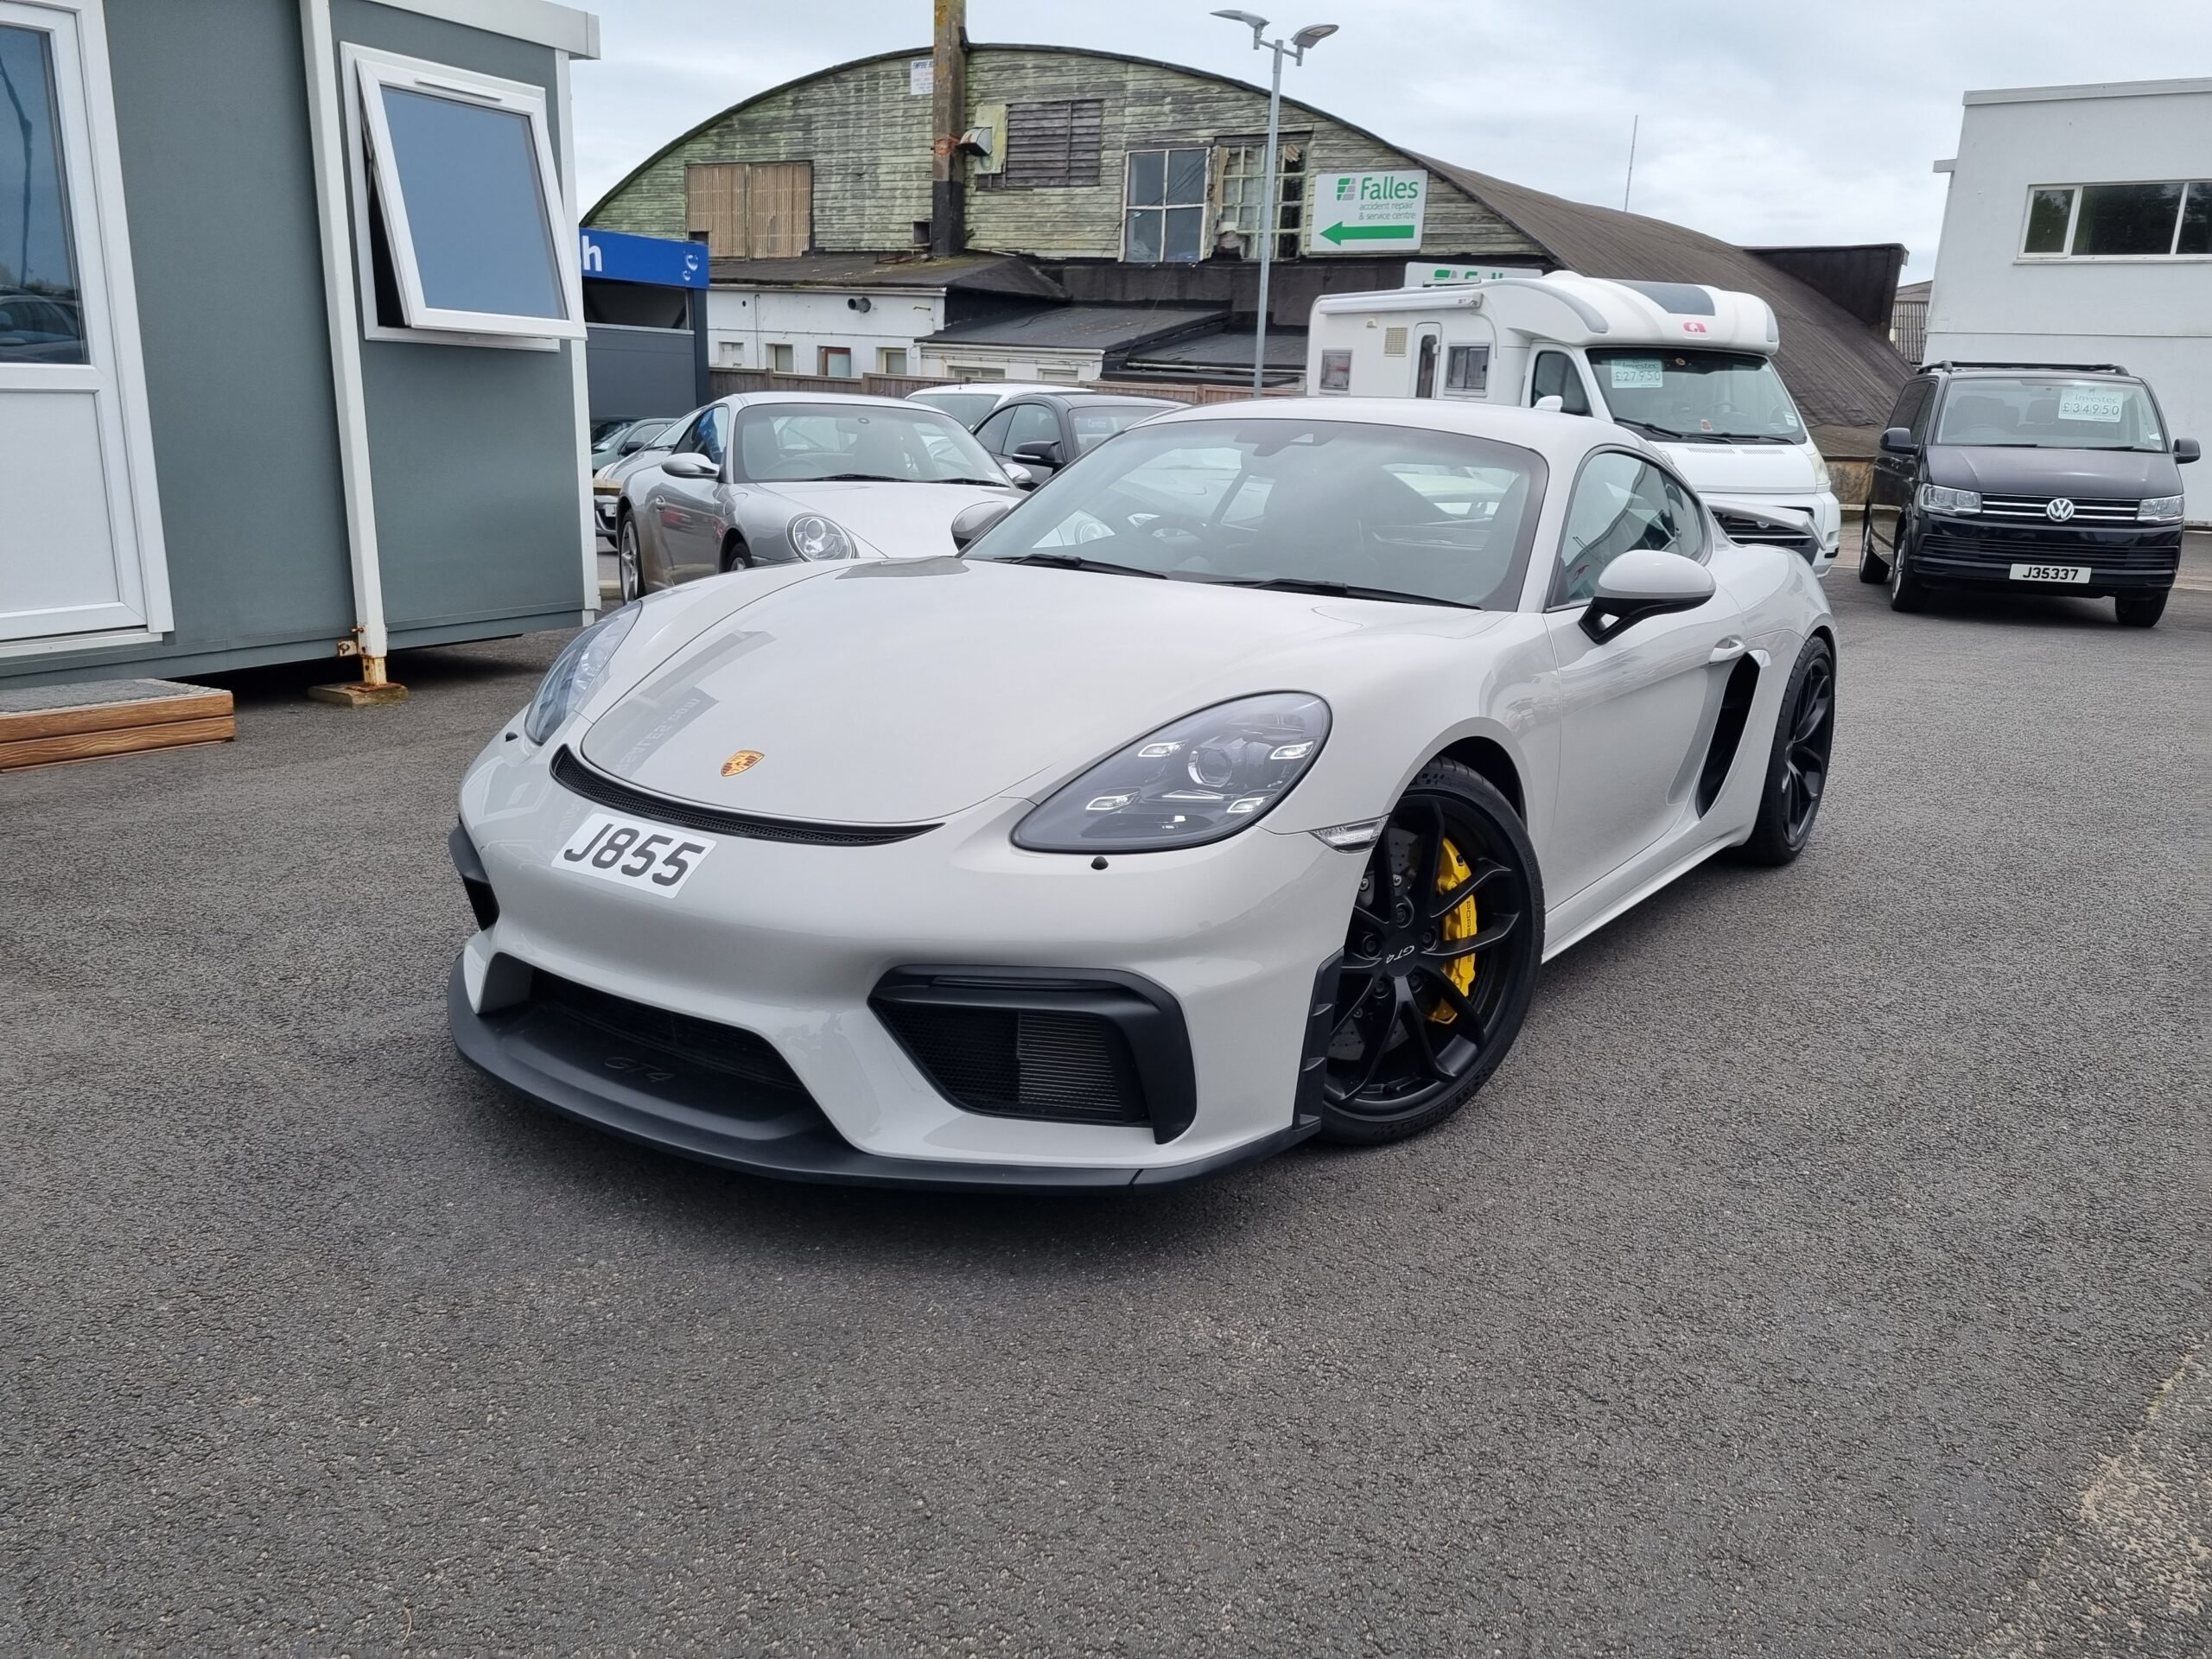 2020 Porsche Cayman Gt4 Club Sport 40 Coupe Only 1700 Miles18100 Worth Of Factory Options 10